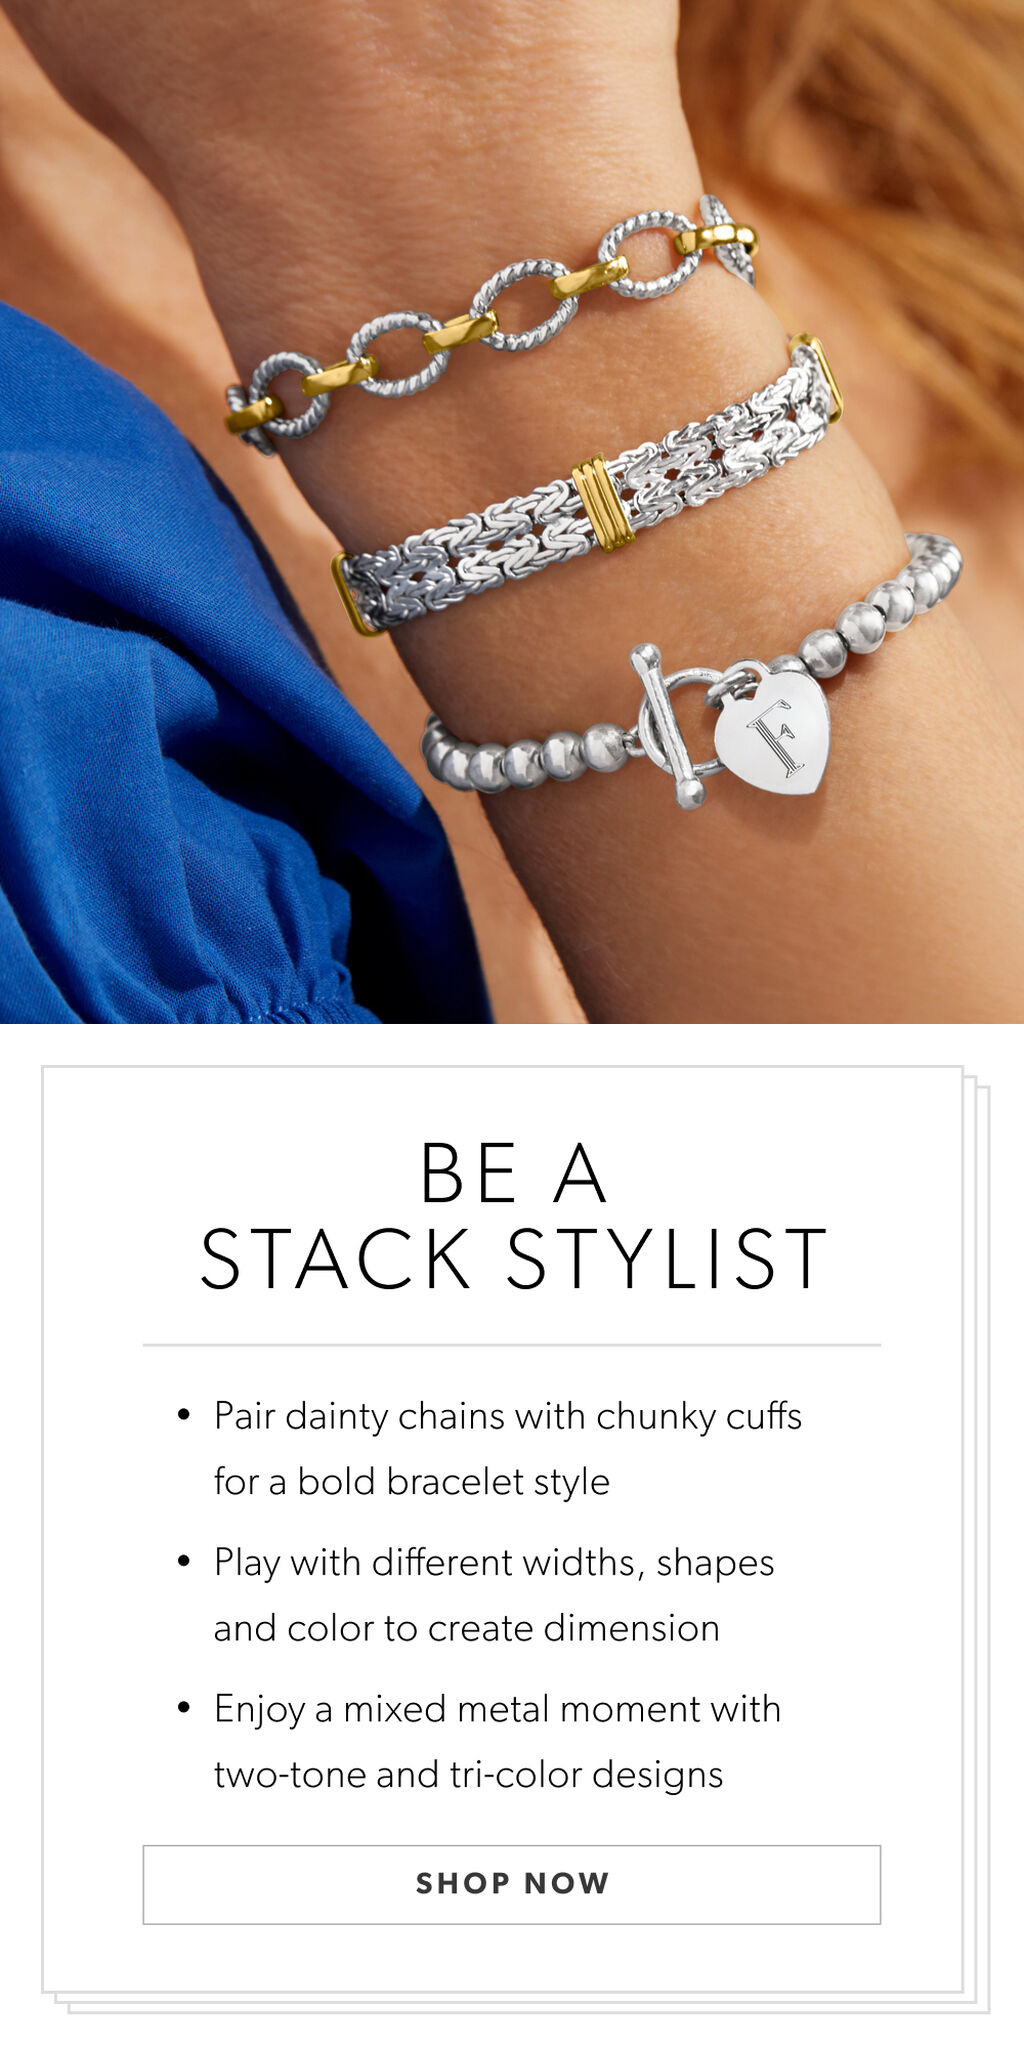 Be A Stacked Stylist